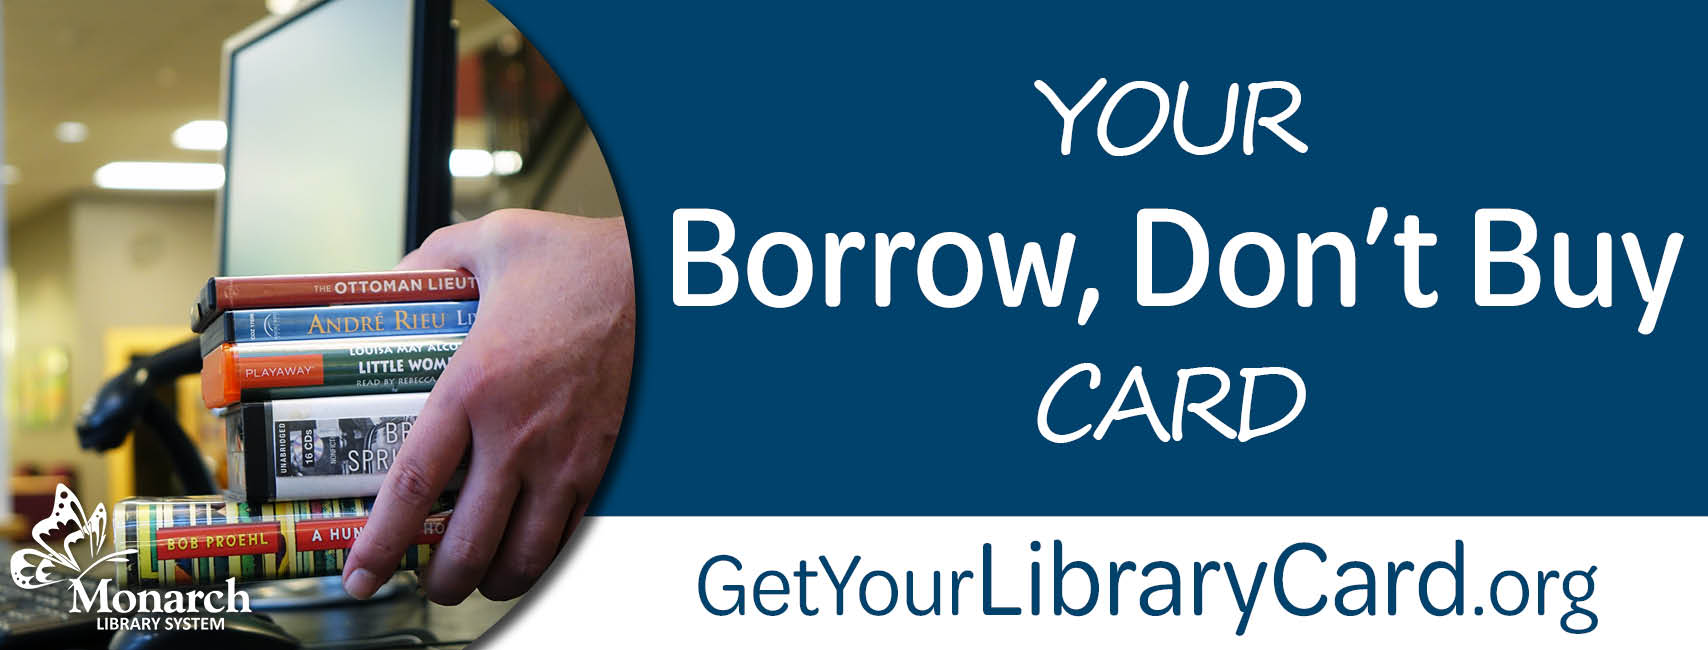 Get YOur Library Card